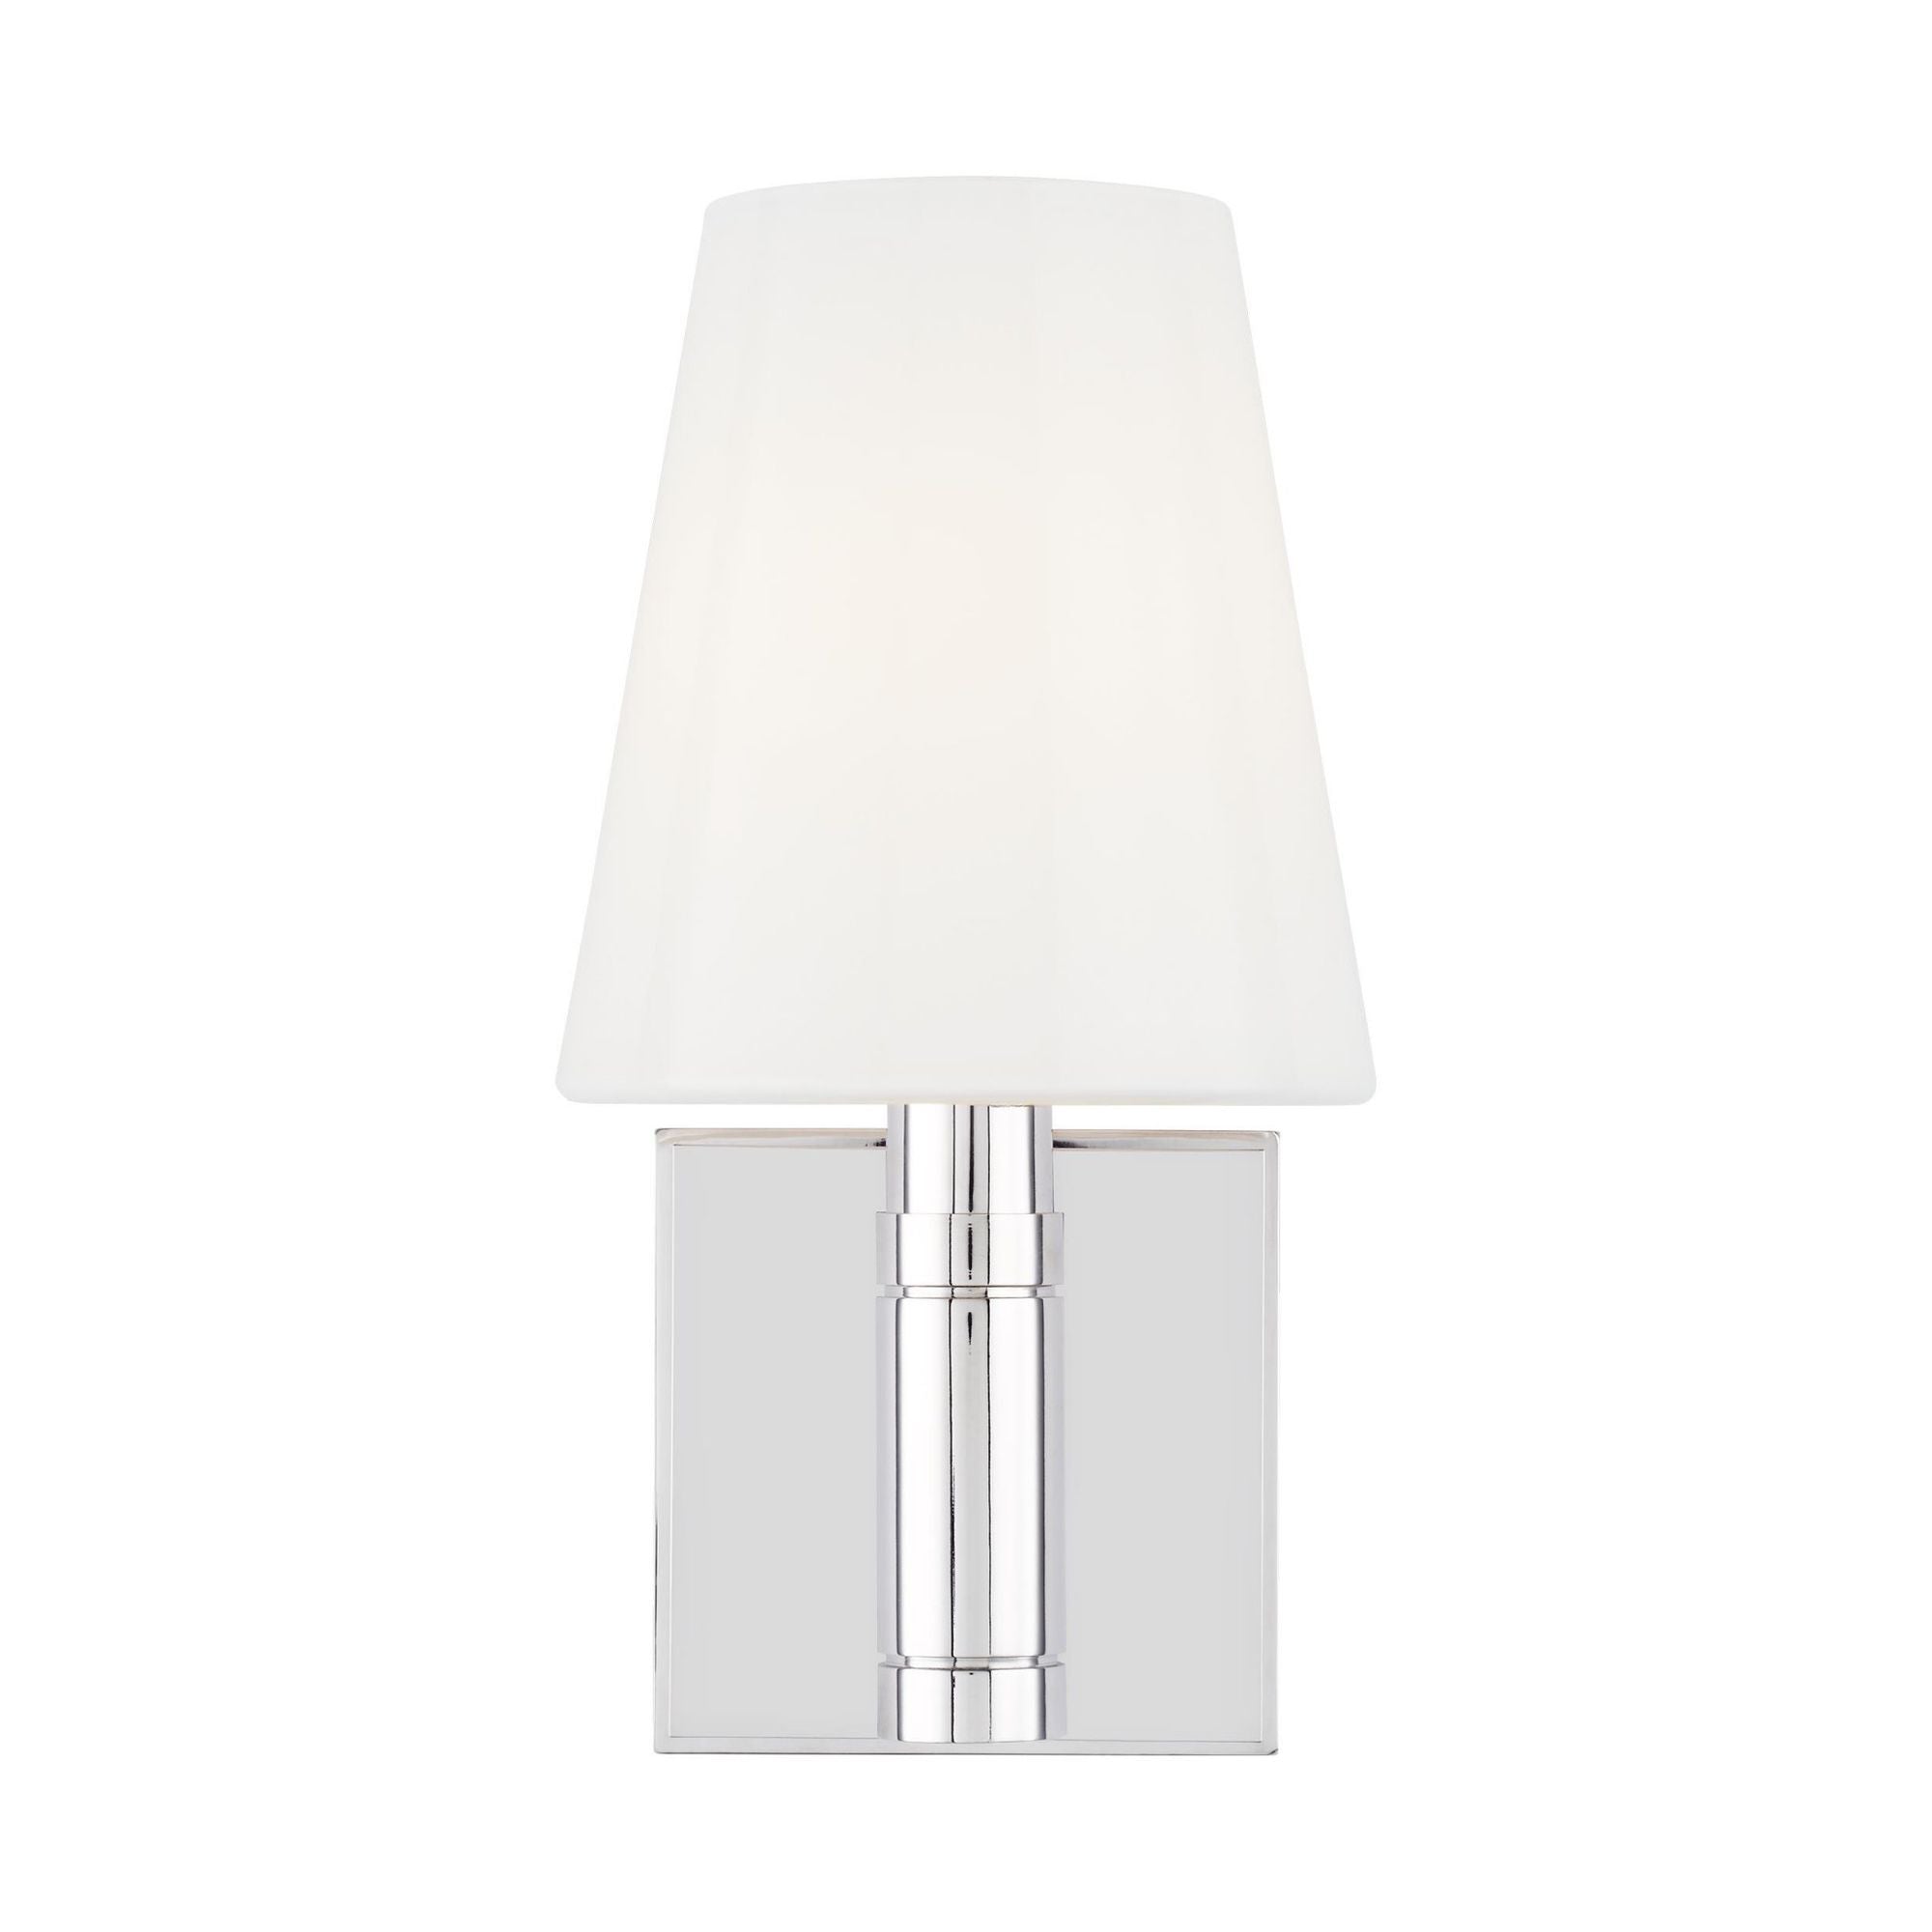 Thomas O'Brien Beckham Classic Square Sconce in Polished Nickel